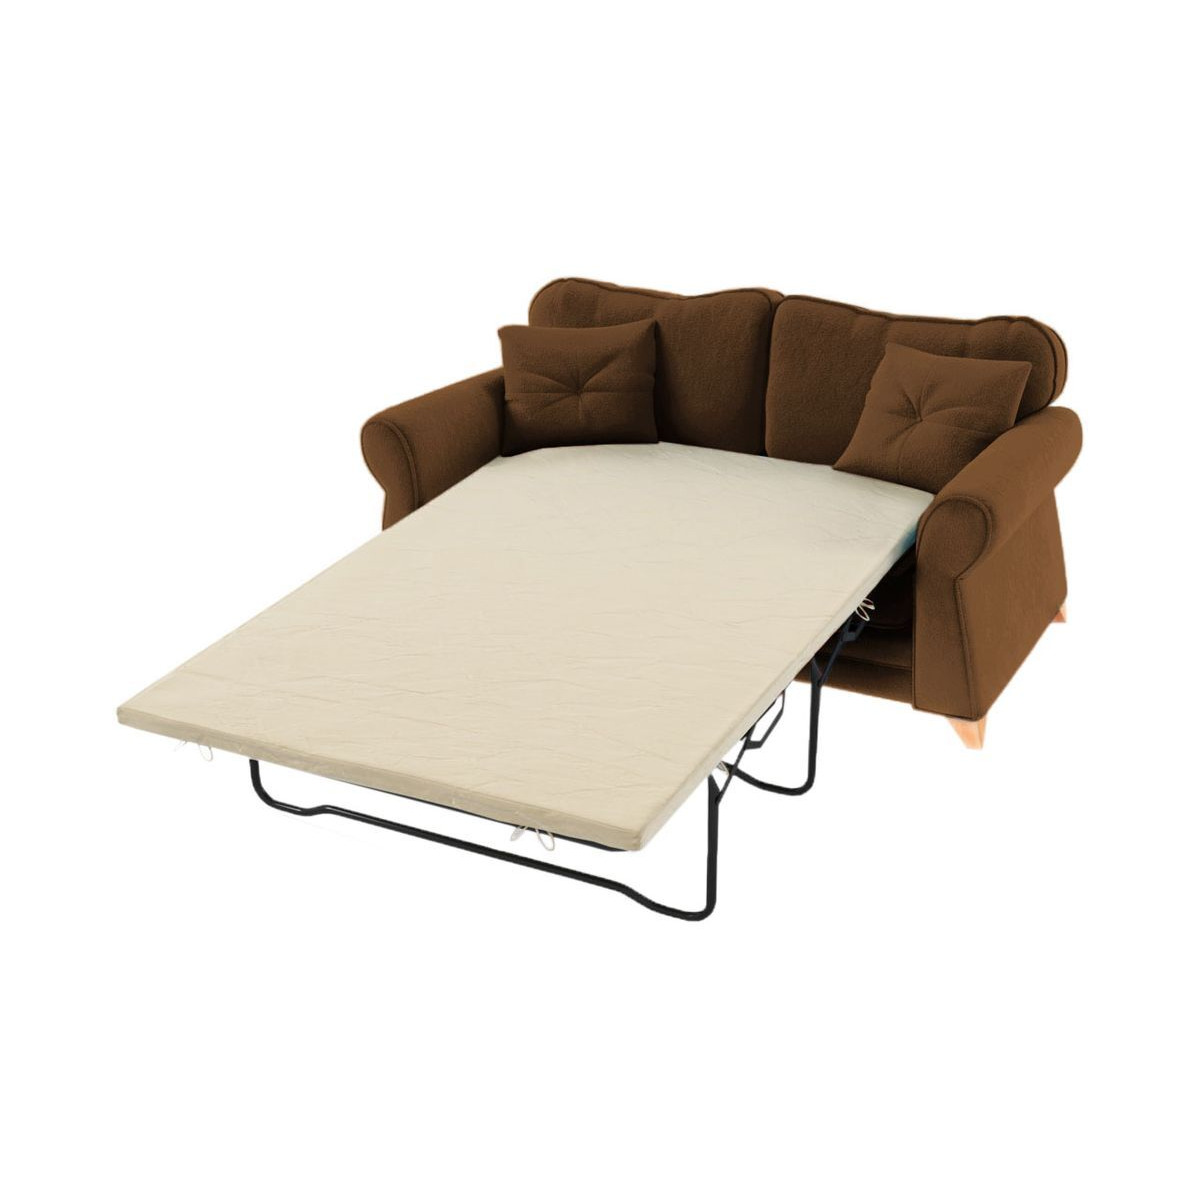 Lear 2 Seater Sofa Bed, brown - image 1